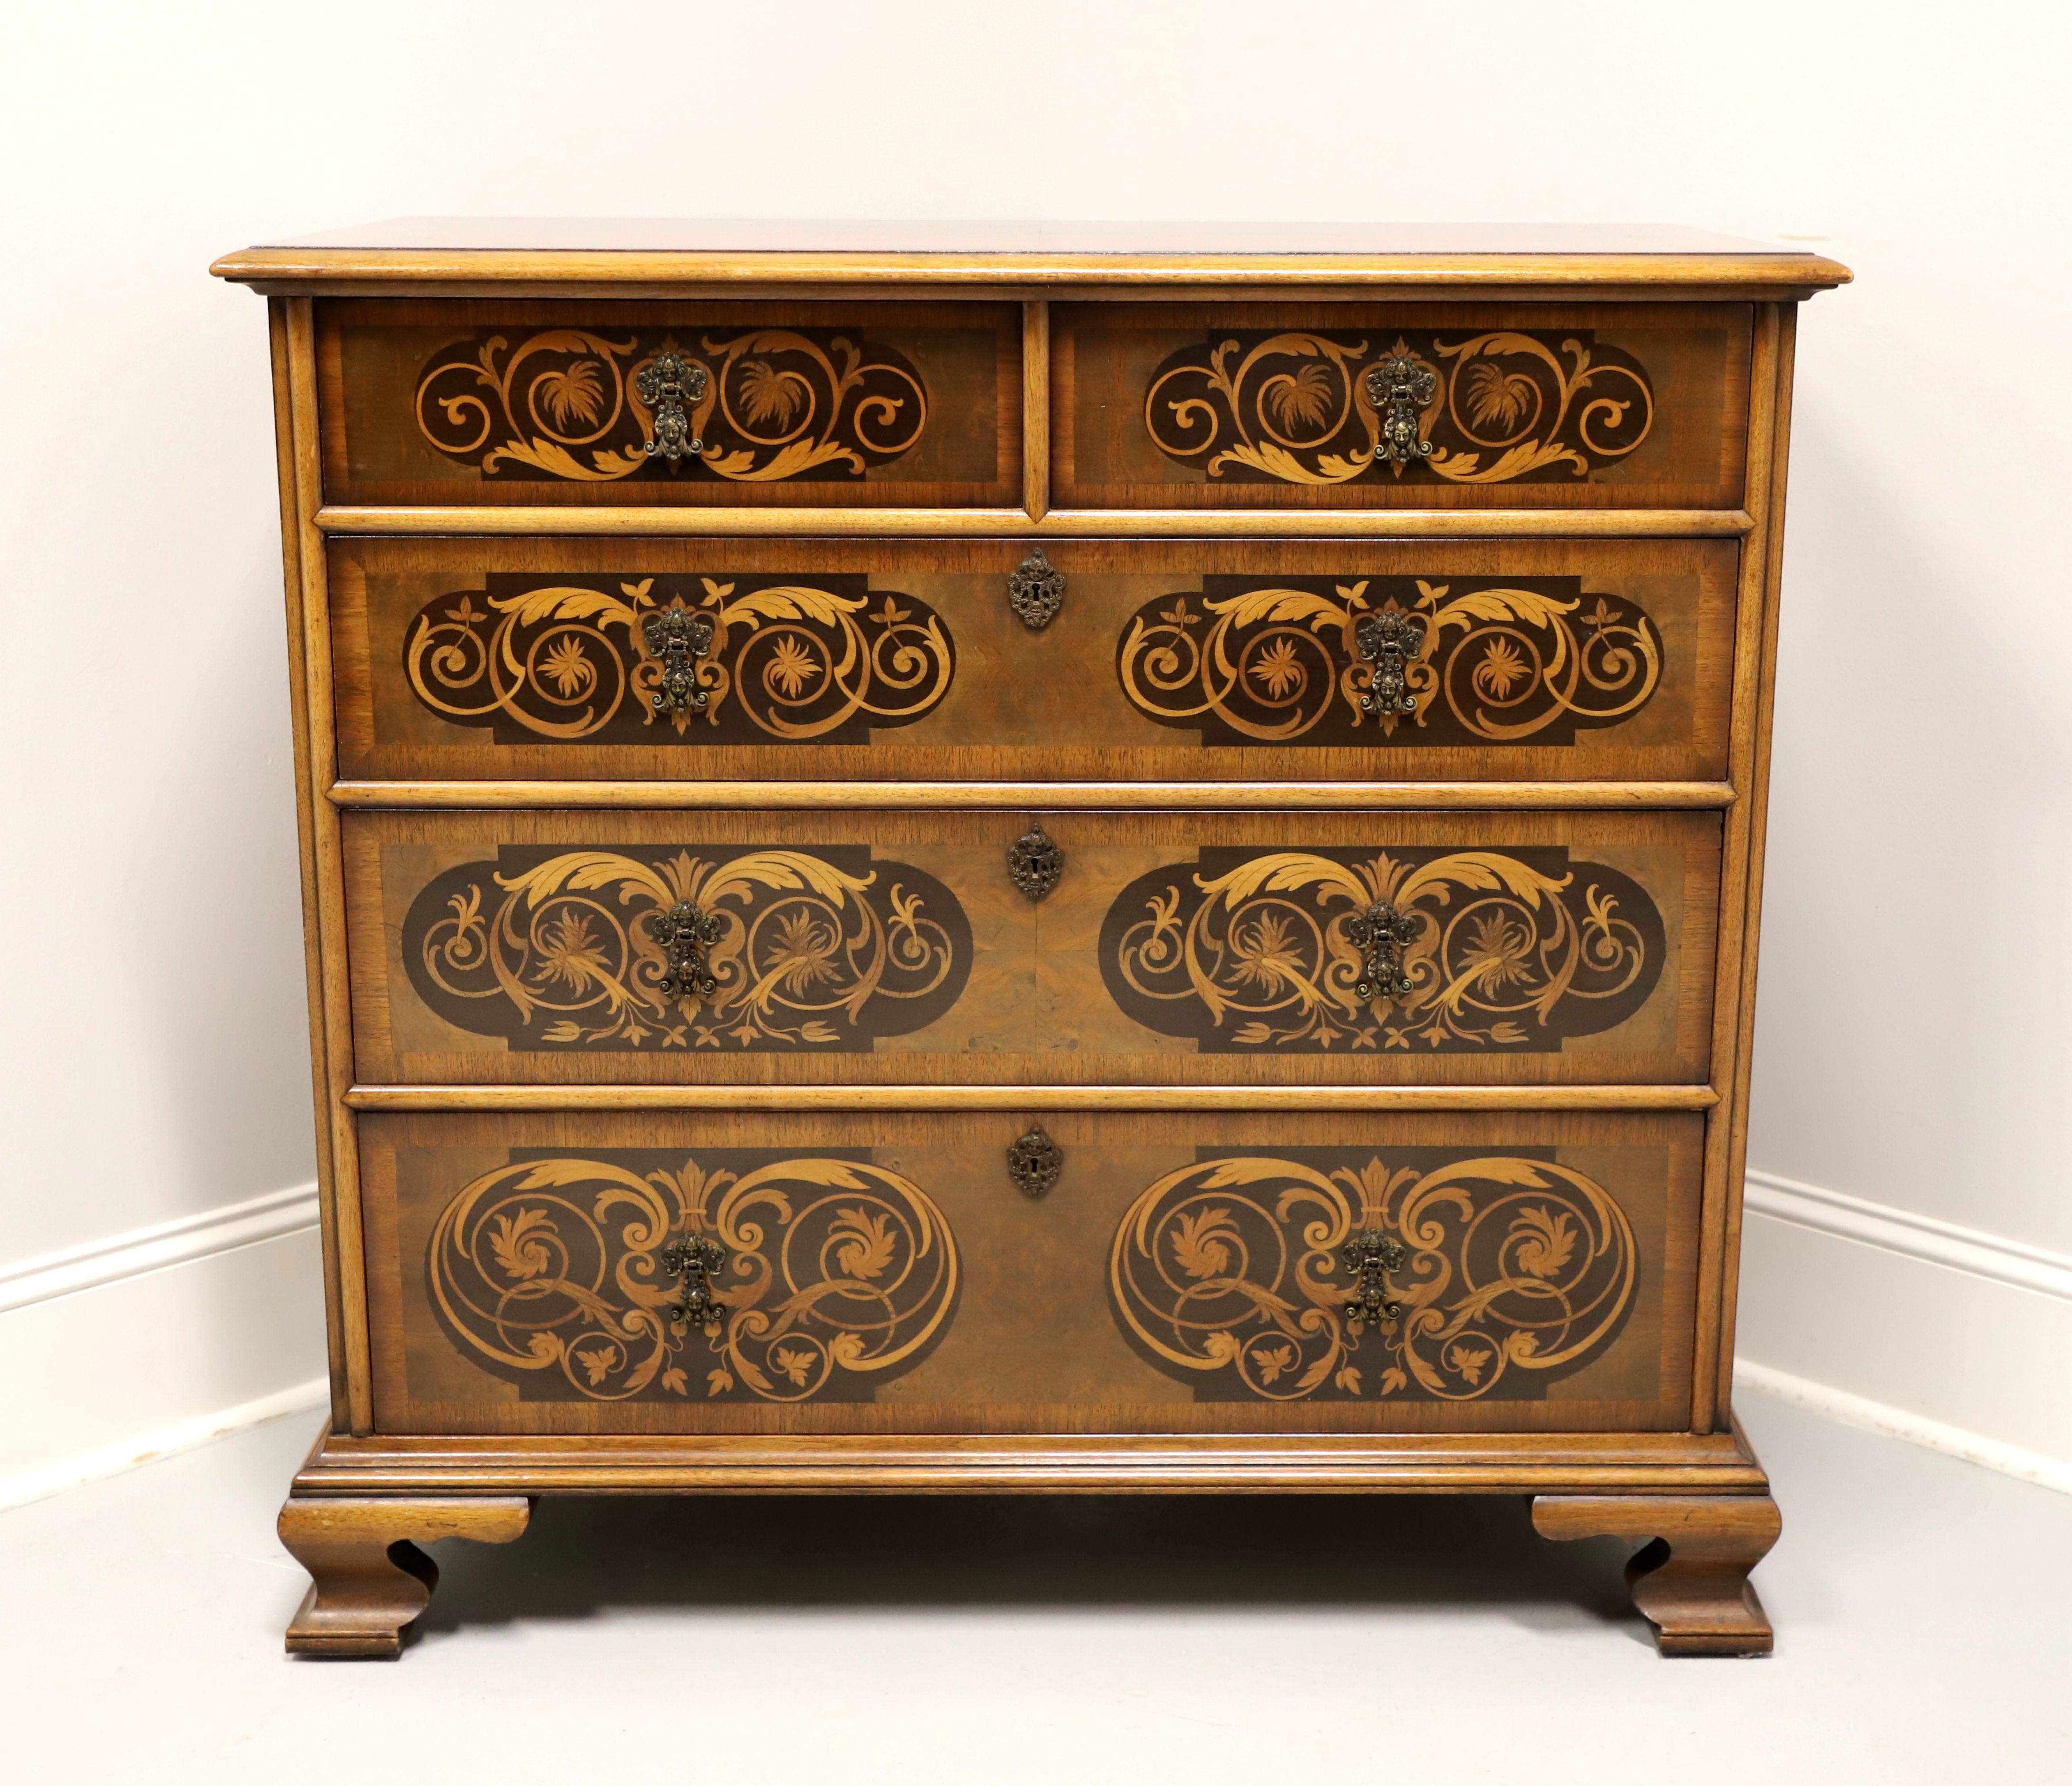 A stunning chest of drawers by Century Furniture, of Grand Rapids, Michigan, USA. Walnut with inlaid details on top, sides & drawer fronts, brass hardware, and ogee bracket feet. Features two smaller over three larger drawers, all of dovetail